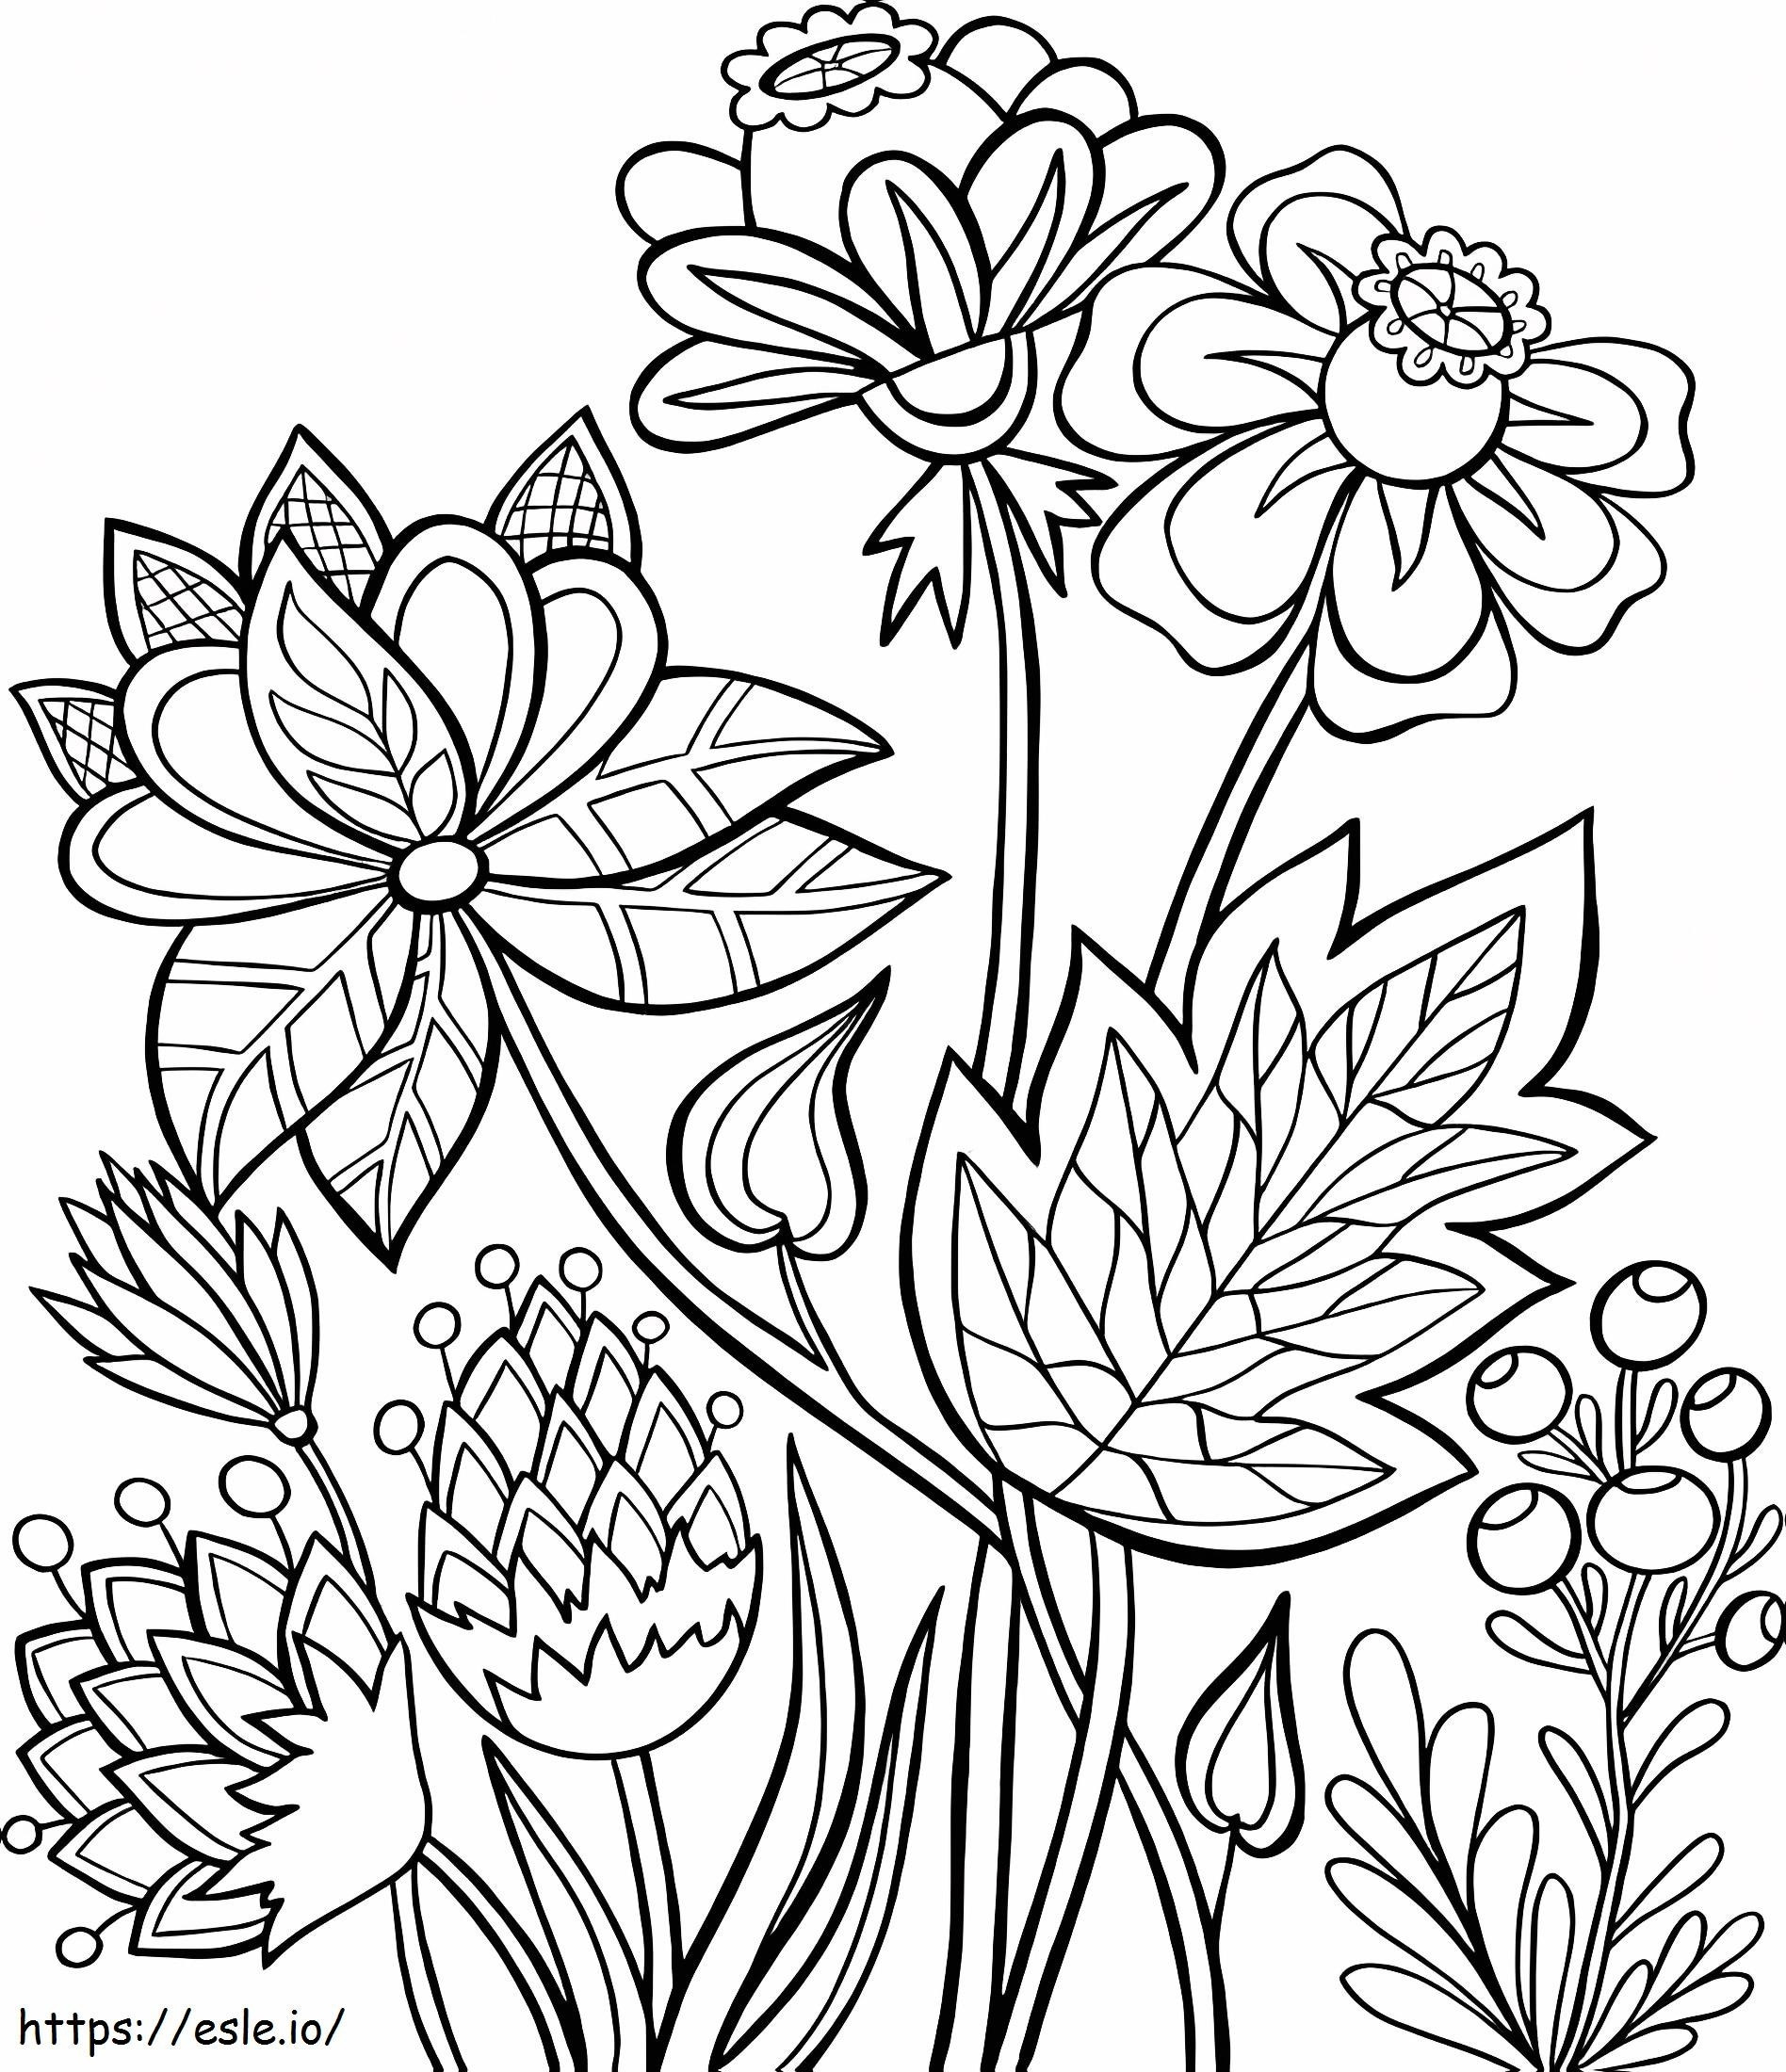 Flower For Adult coloring page